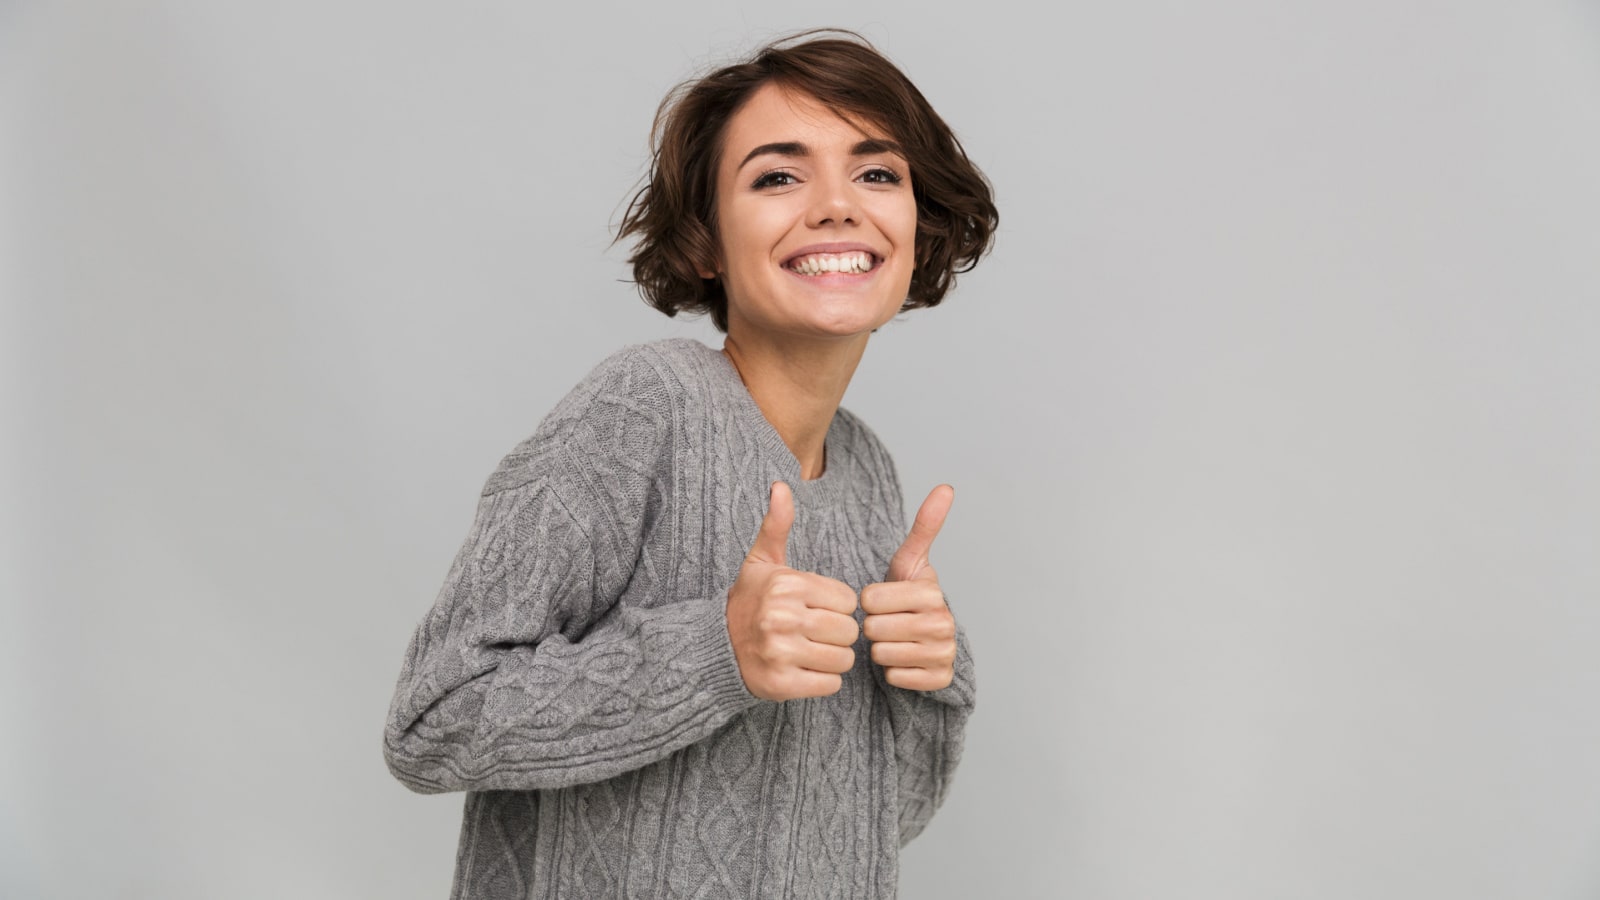 Image of happy young lady dressed in sweater standing isolated over grey background. Looking camera showing thumbs up gesture.